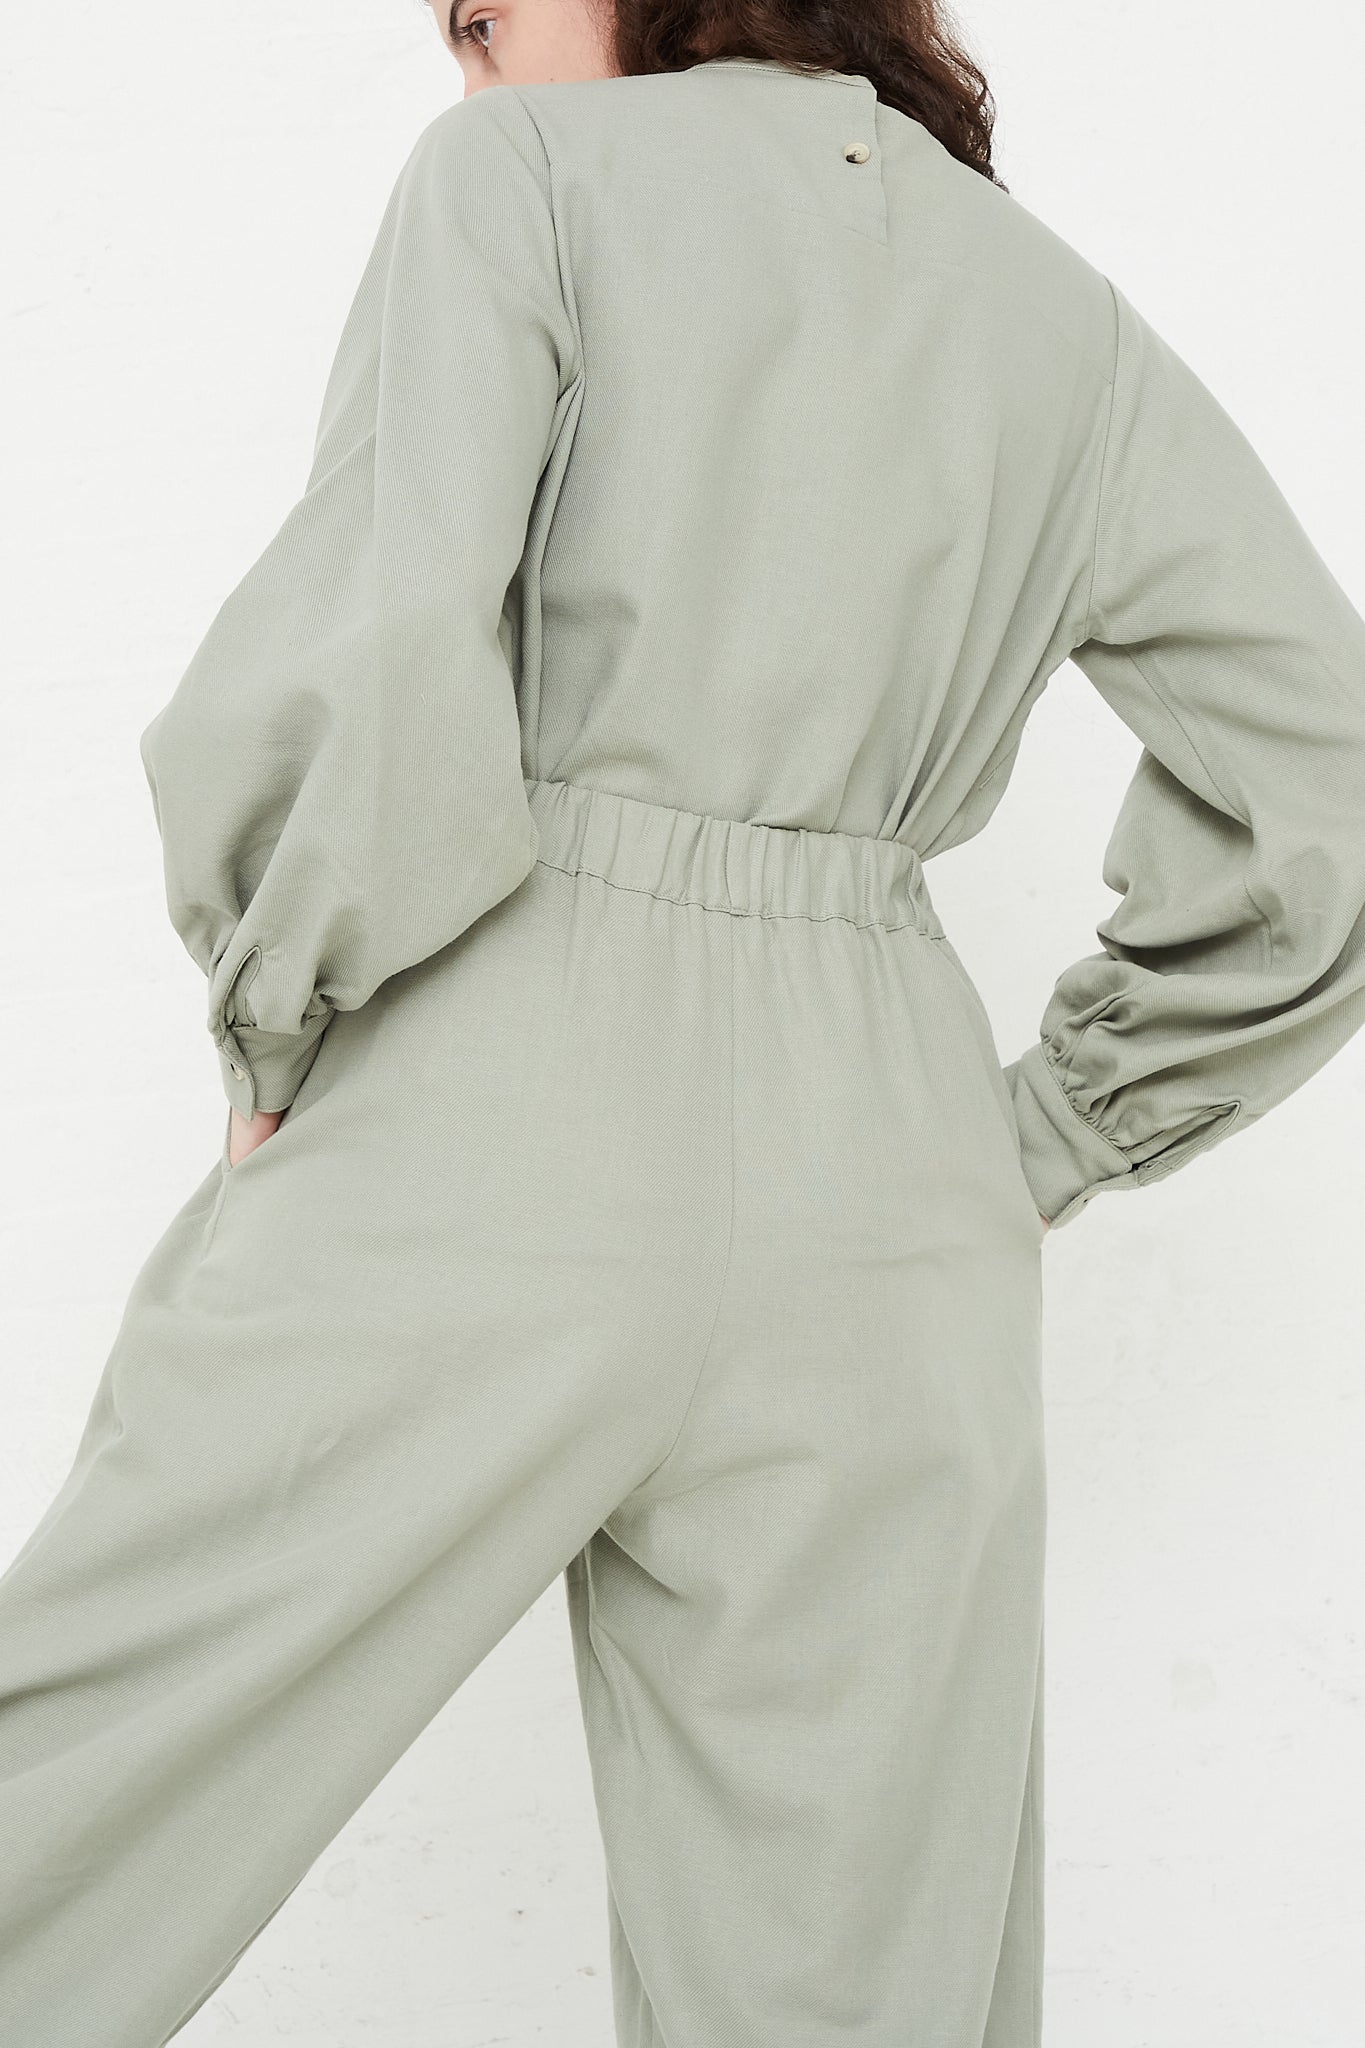 Cotton Twill Draped Pants in Agave by Black Crane for Oroboro Back